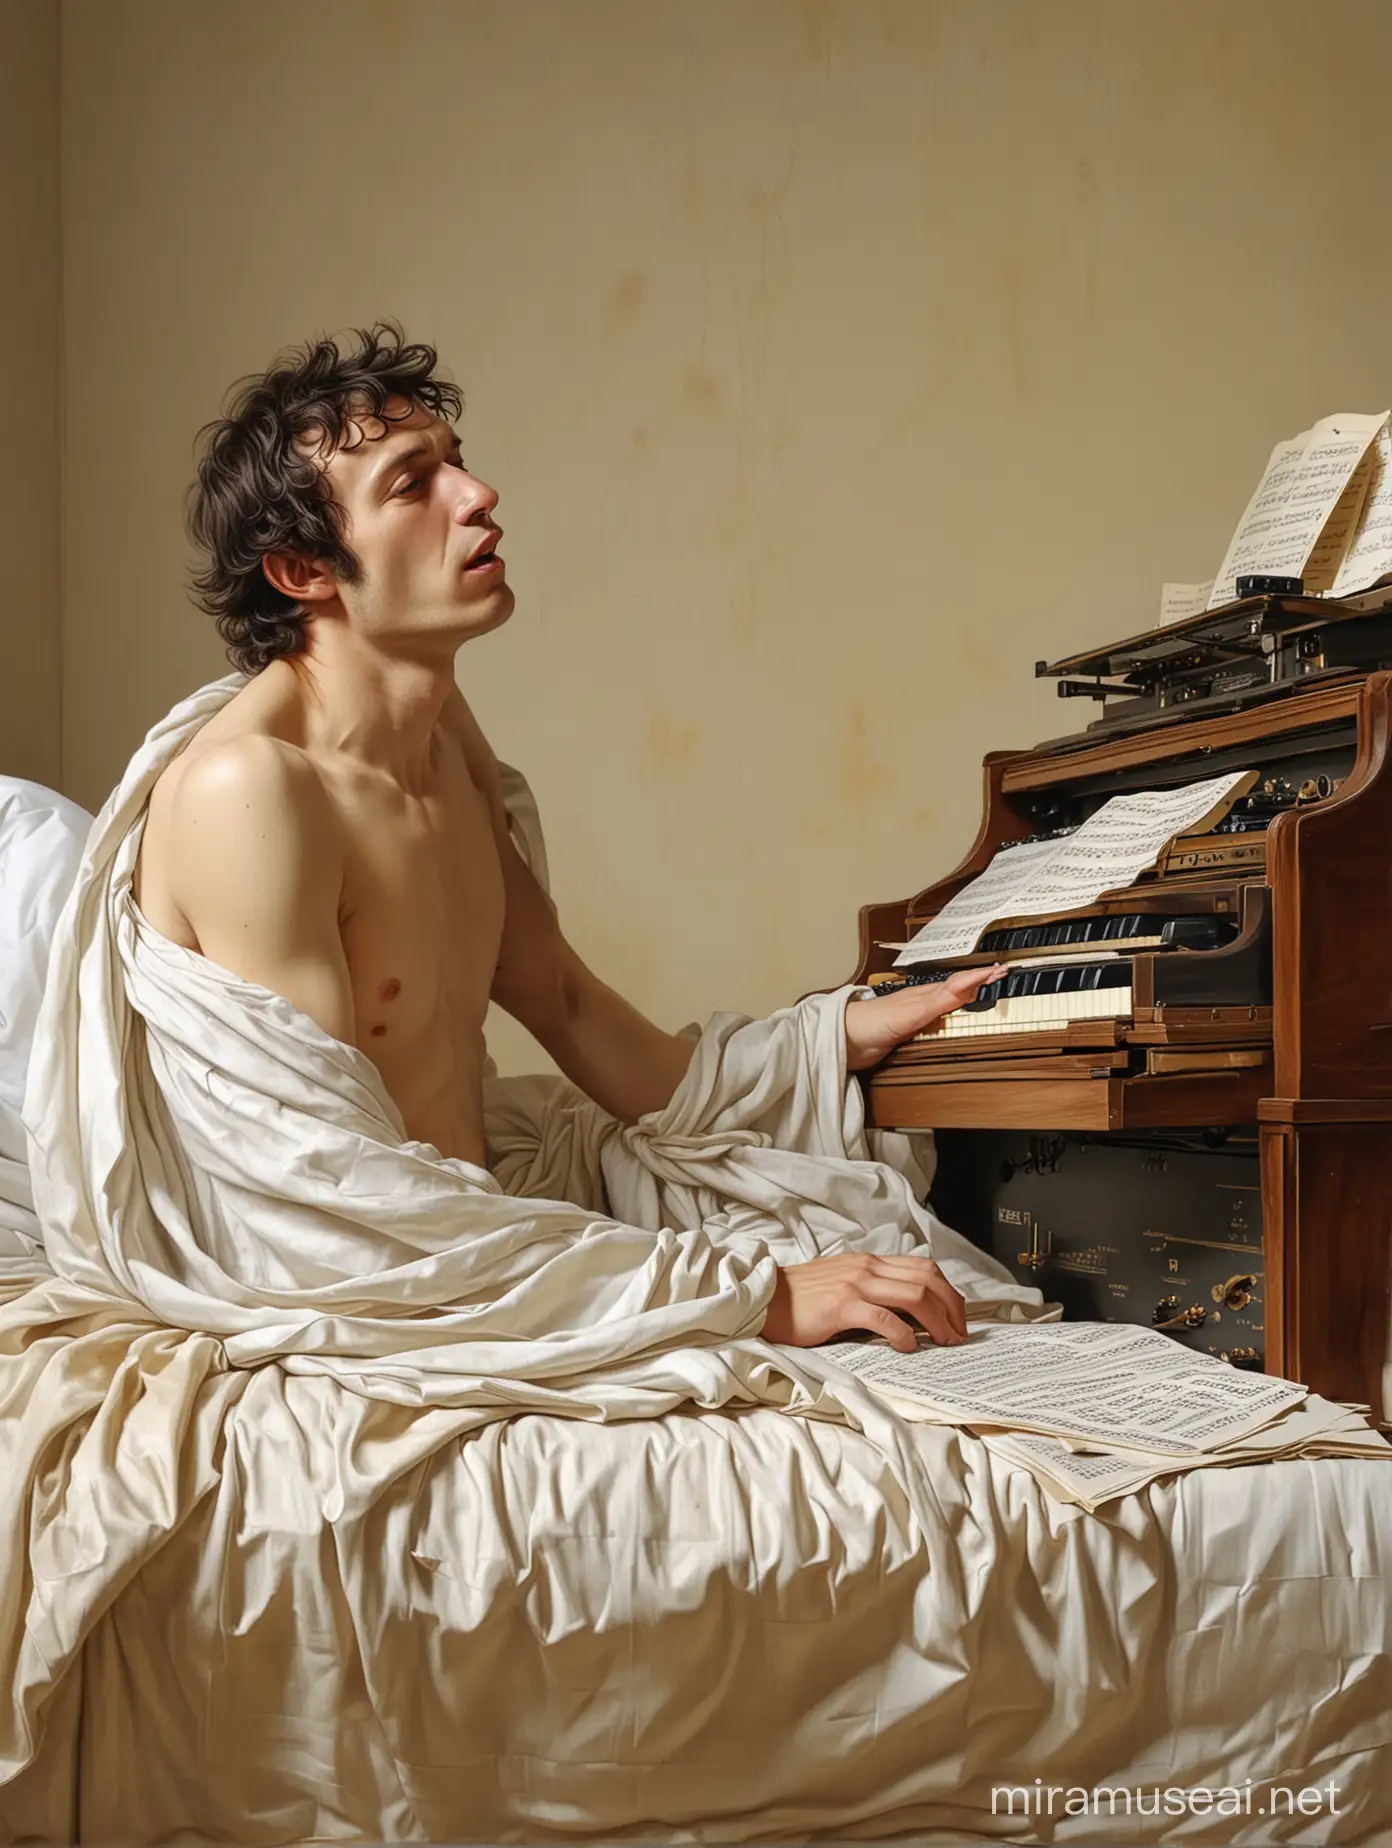 Detailed Painting of a Man with Synthesizer Keyboard and Sheet Music